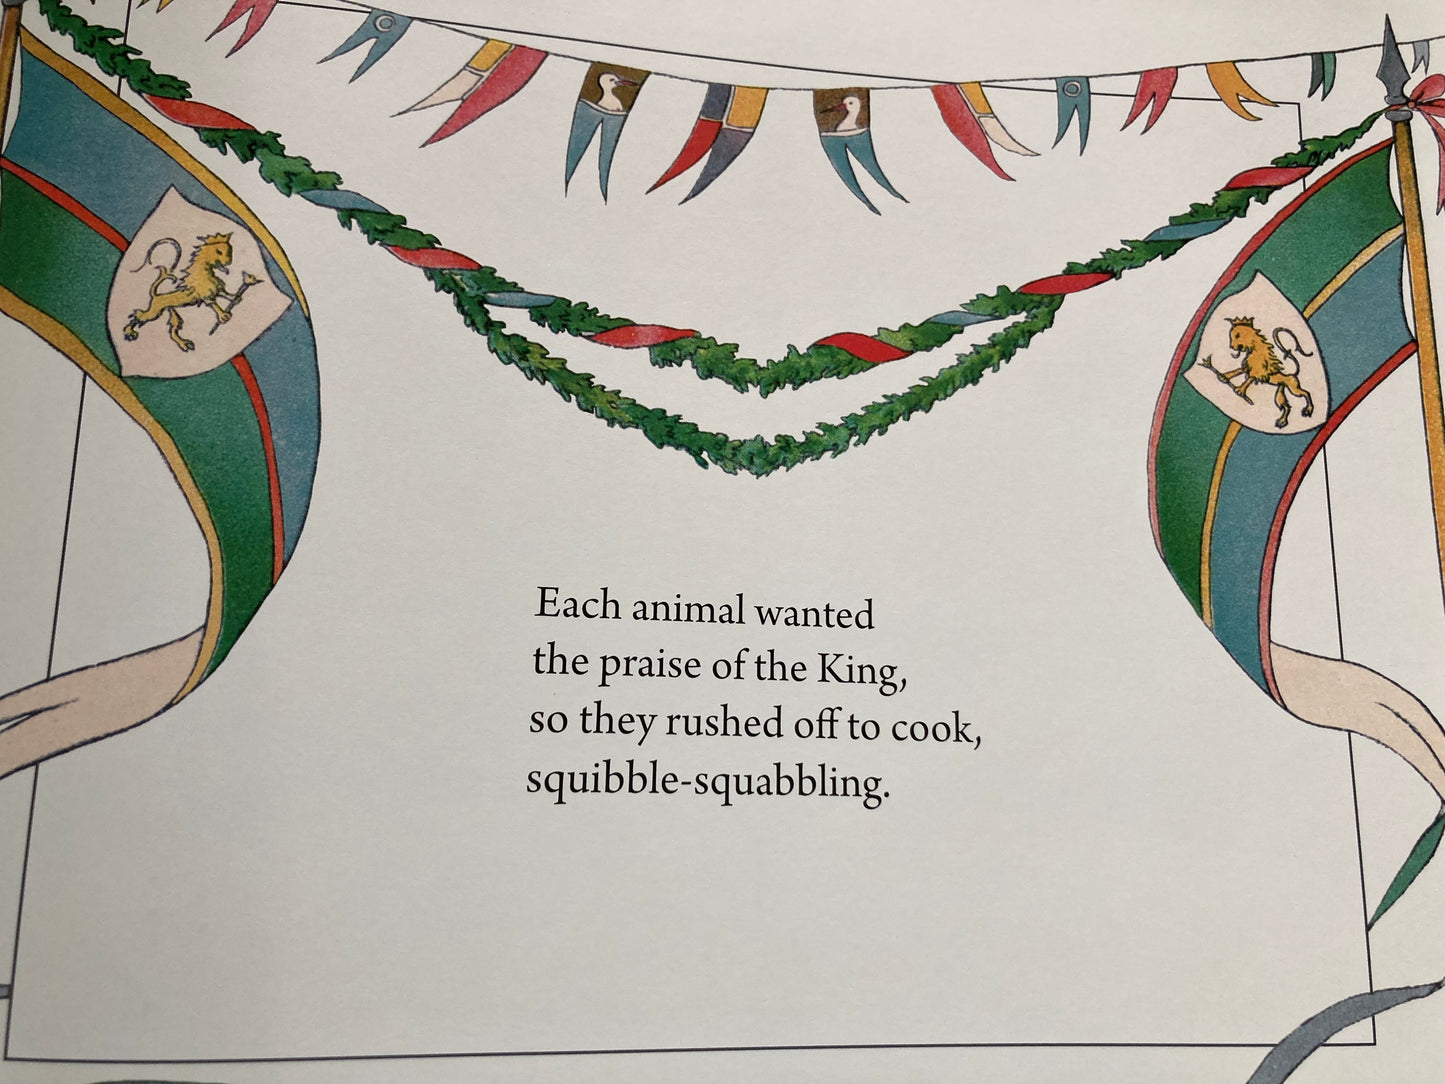 Children's Picture Book - THE STORY OF KING LION